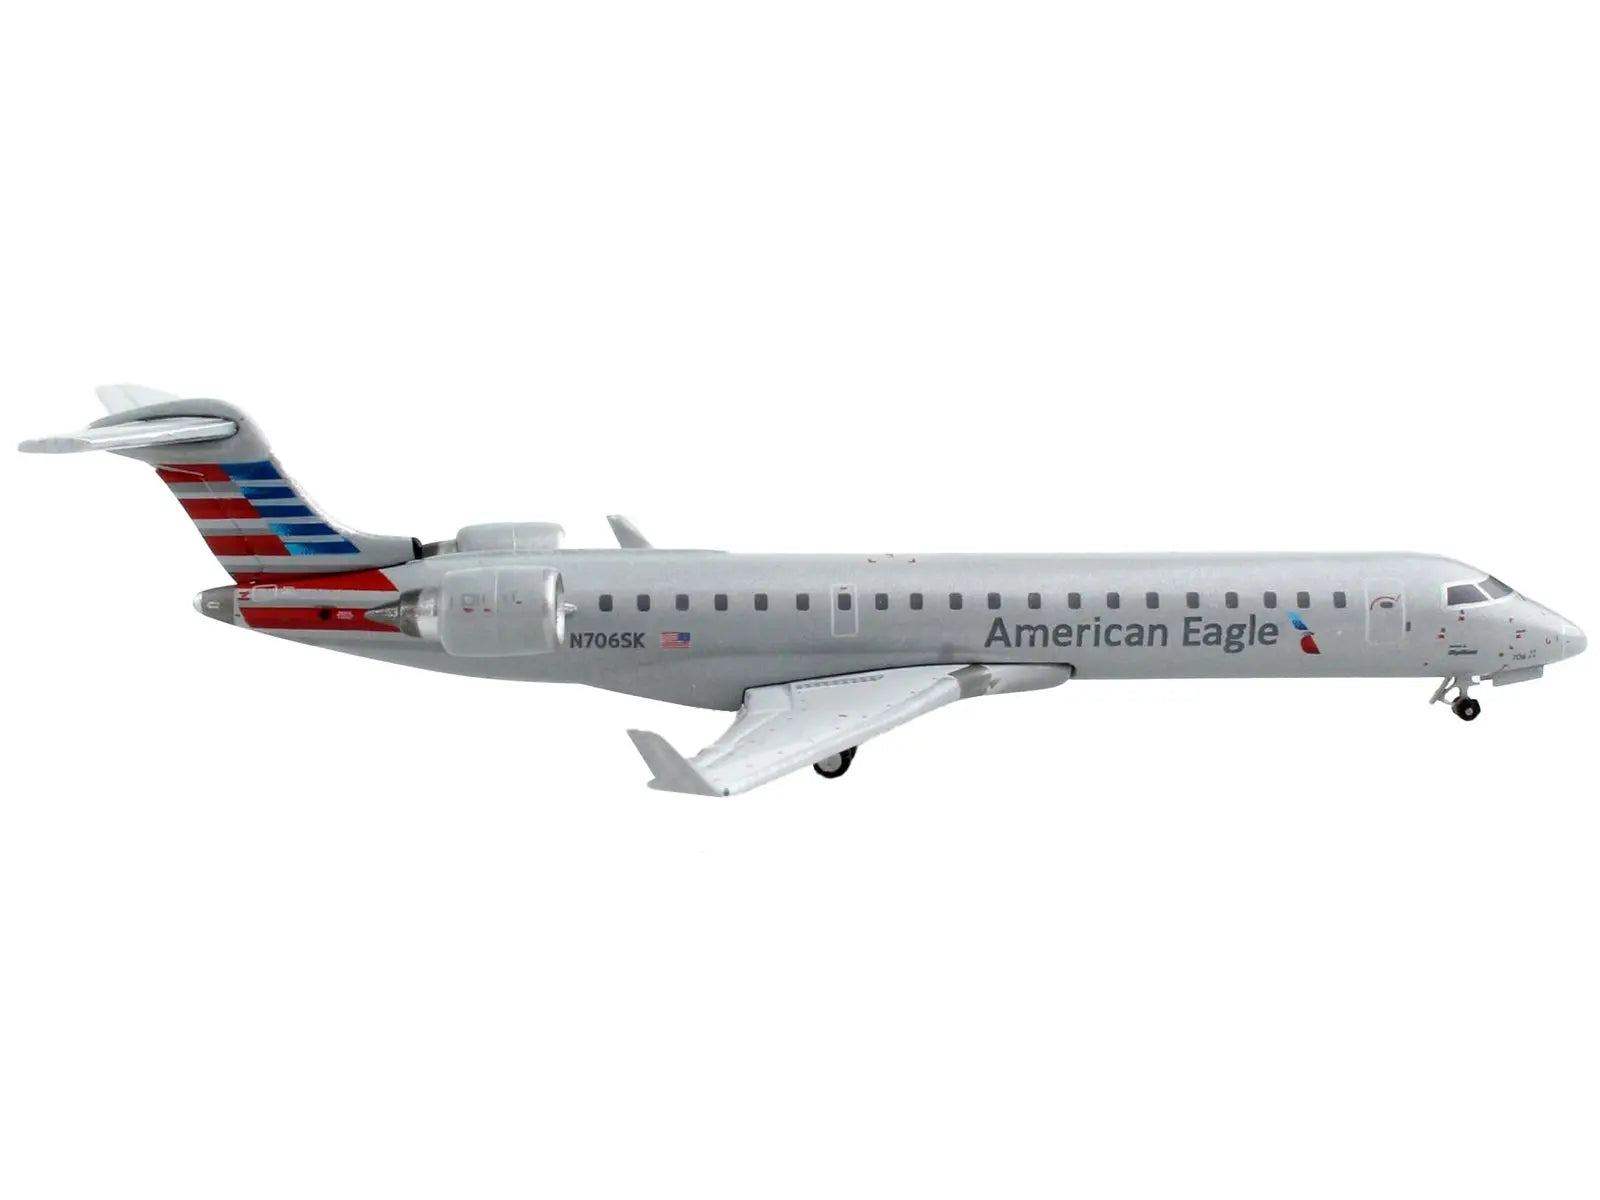 Bombardier CRJ700 Commercial Aircraft "American Airlines - American Eagle" Silver with Striped Tail 1/400 Diecast Model Airplane by GeminiJets GeminiJets